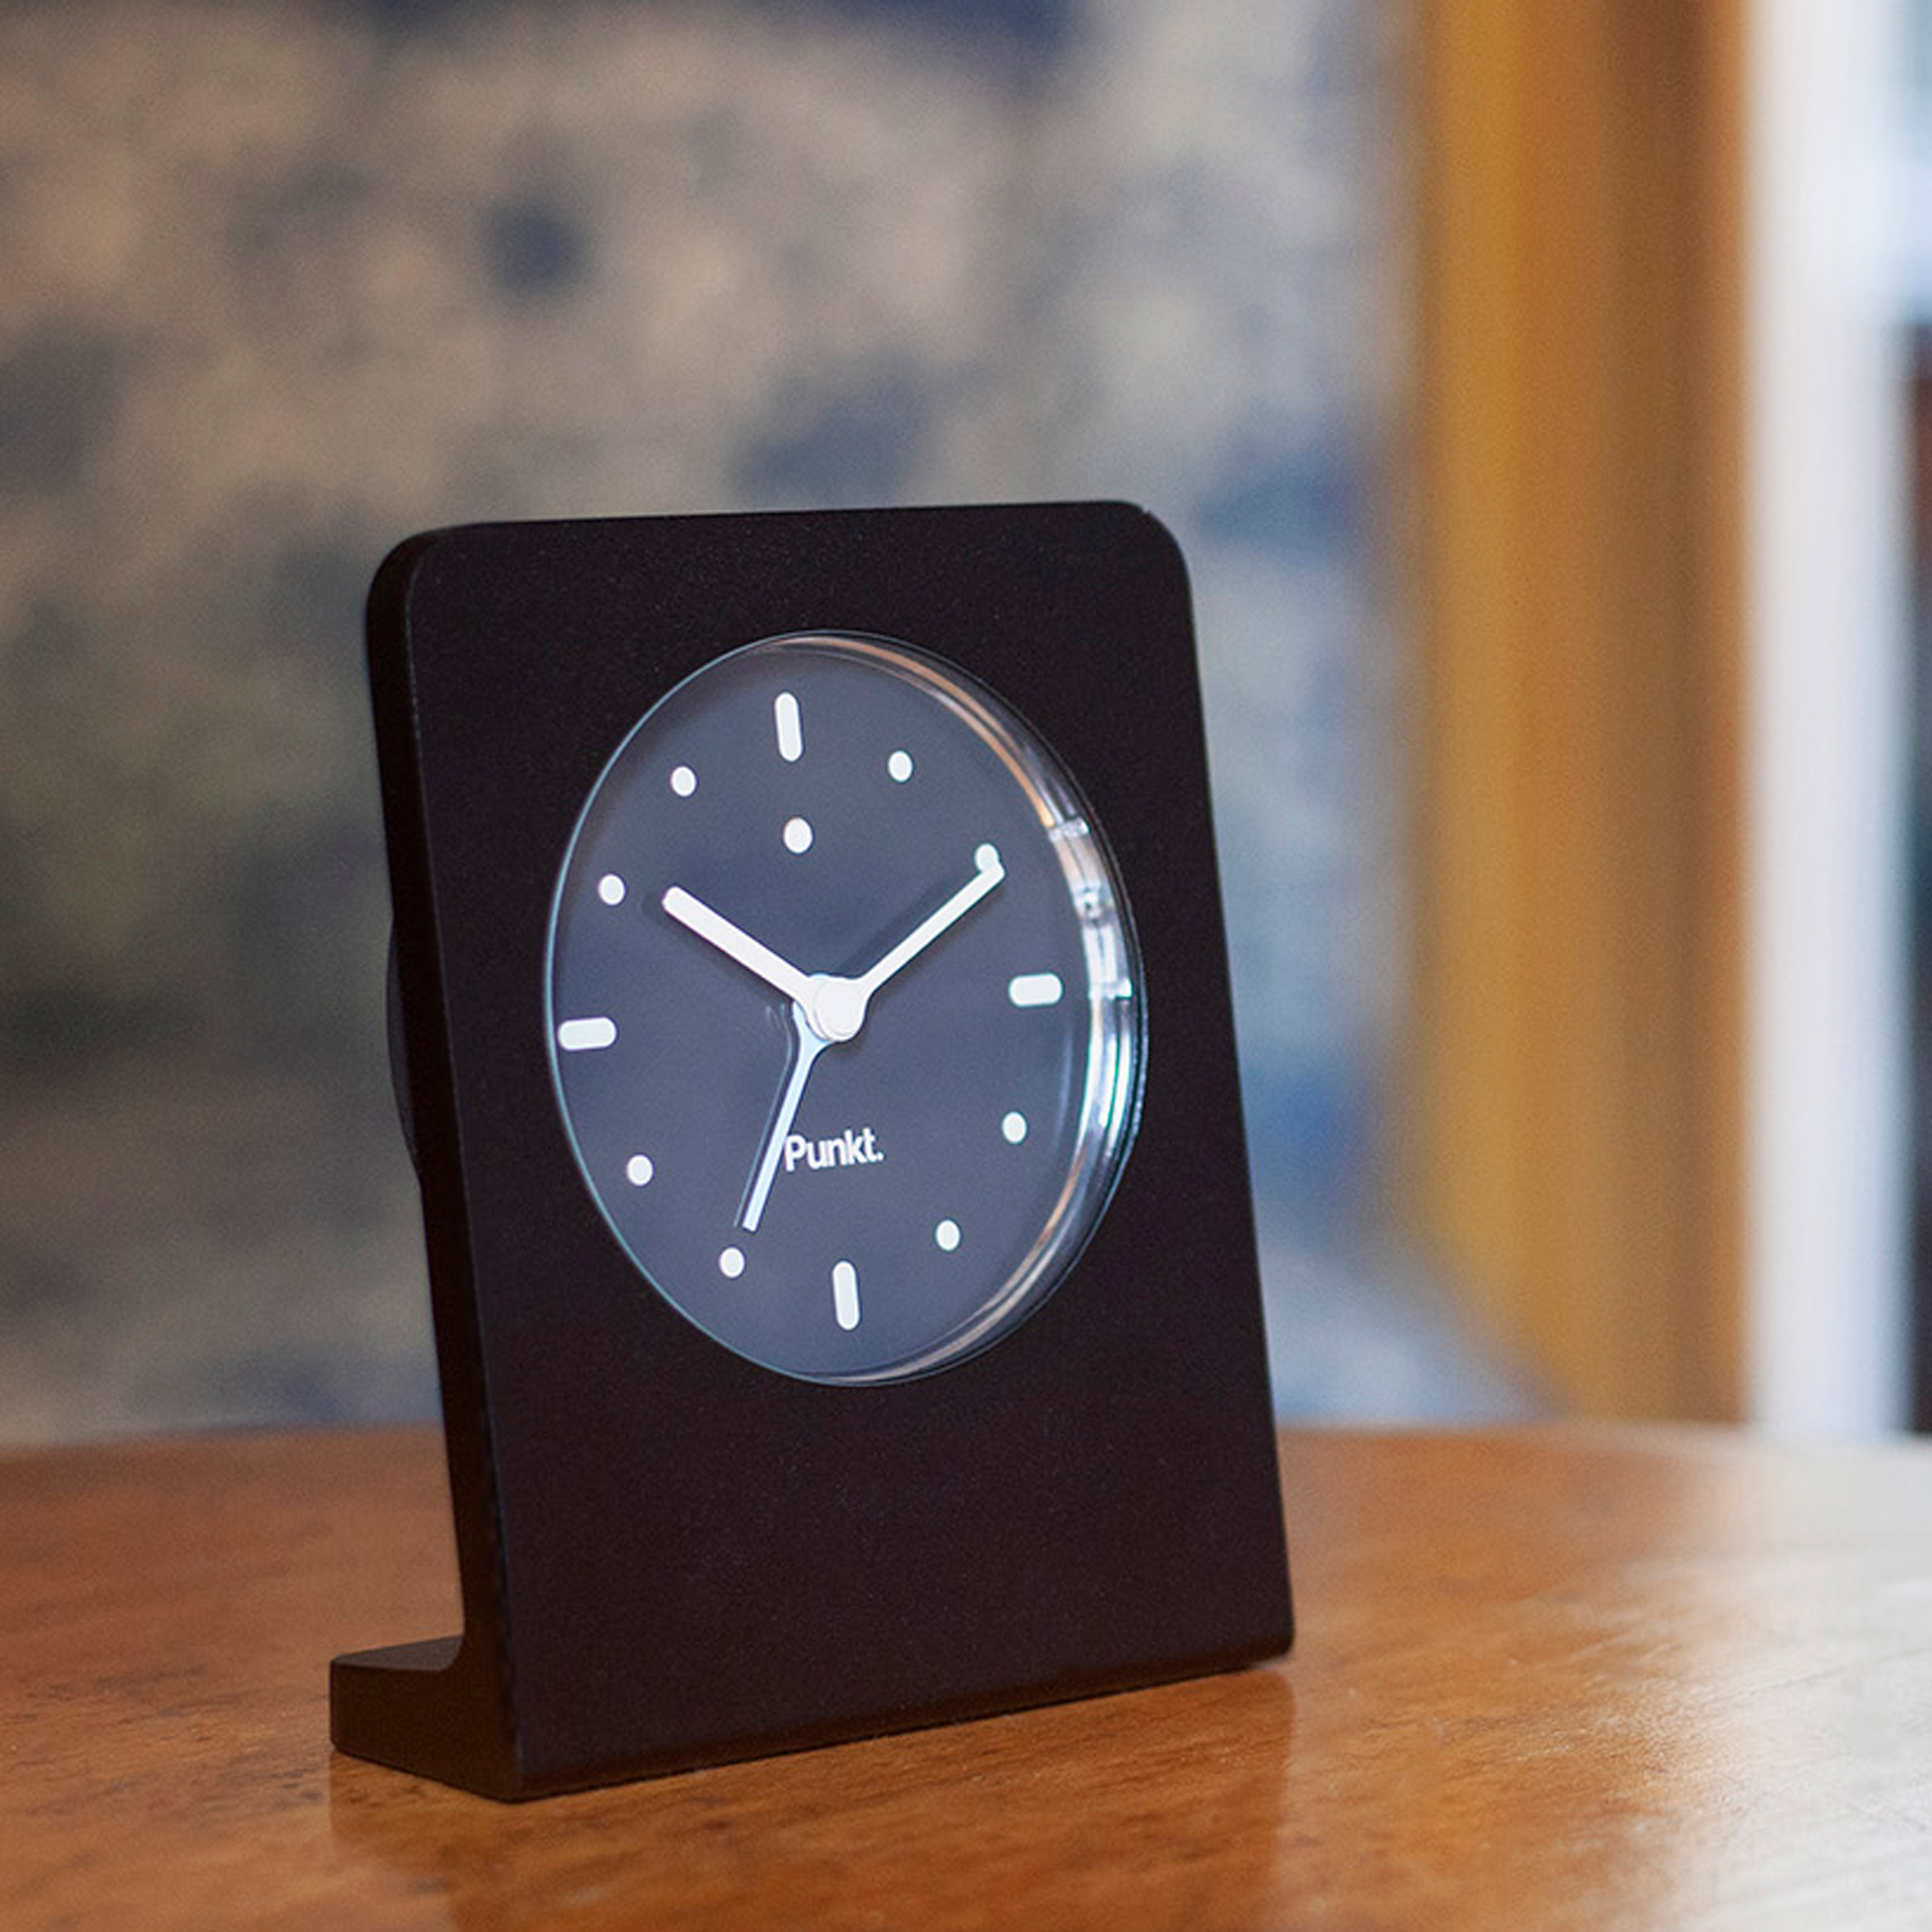 Punkt launches AC02 alarm clock and MP02 mobile phone